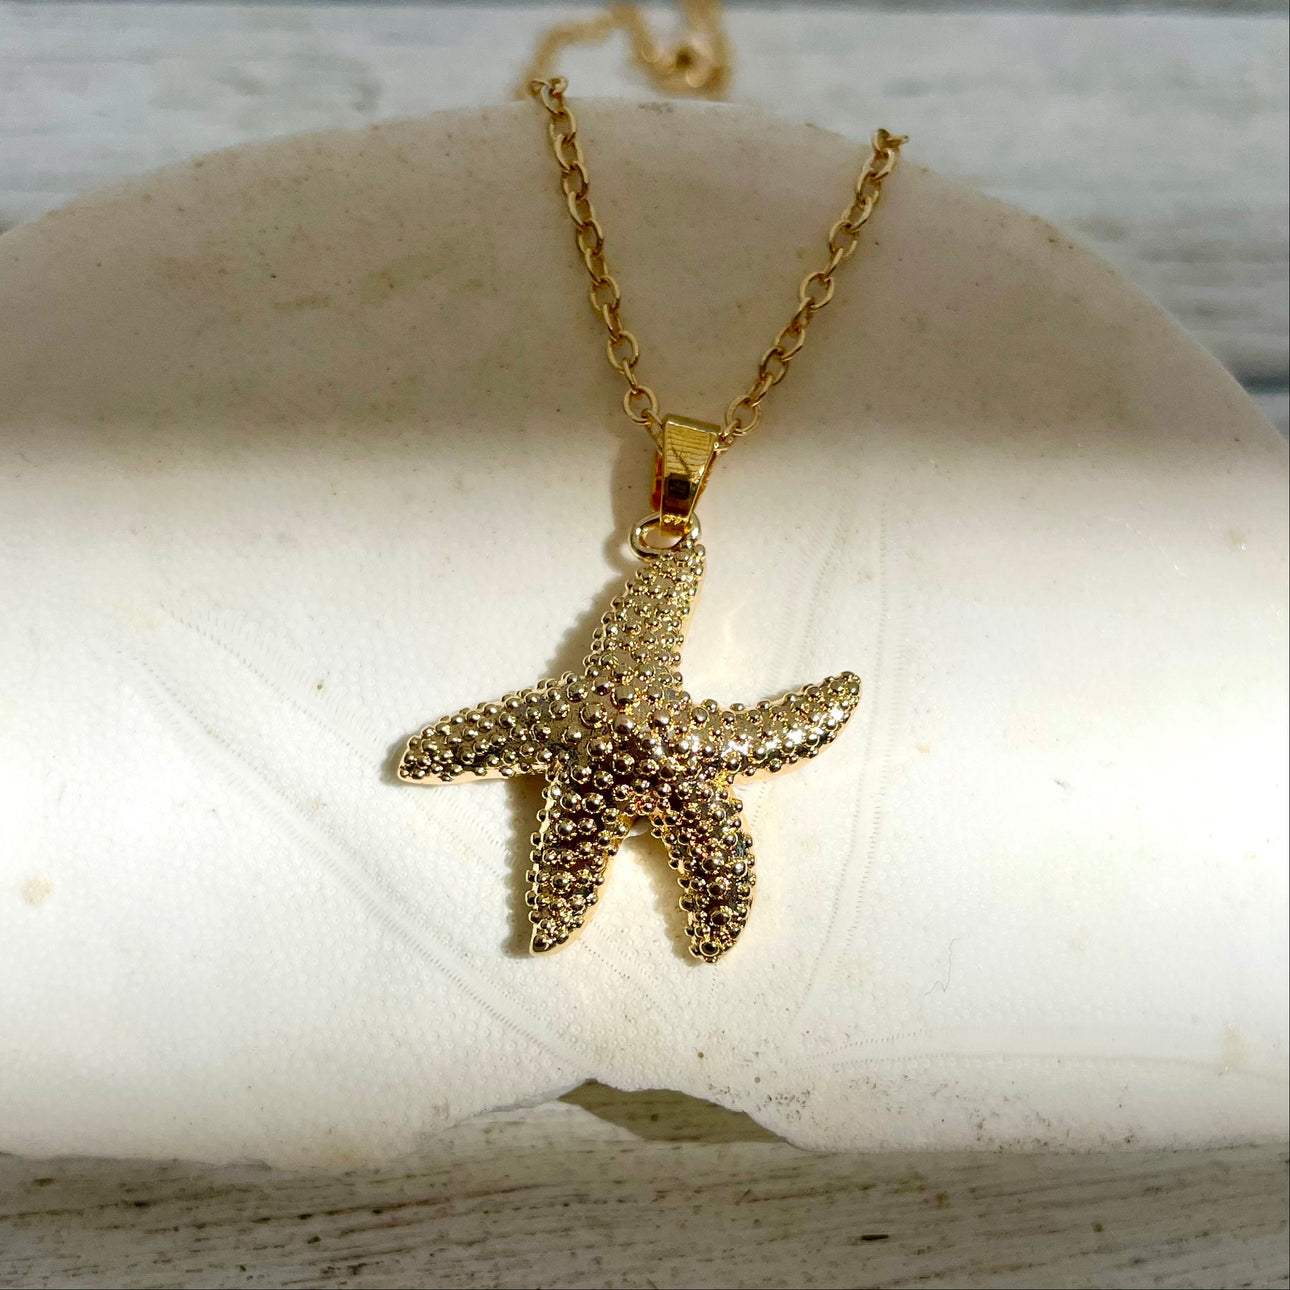 star fish marine life gold plated pendant necklace boheme life collection